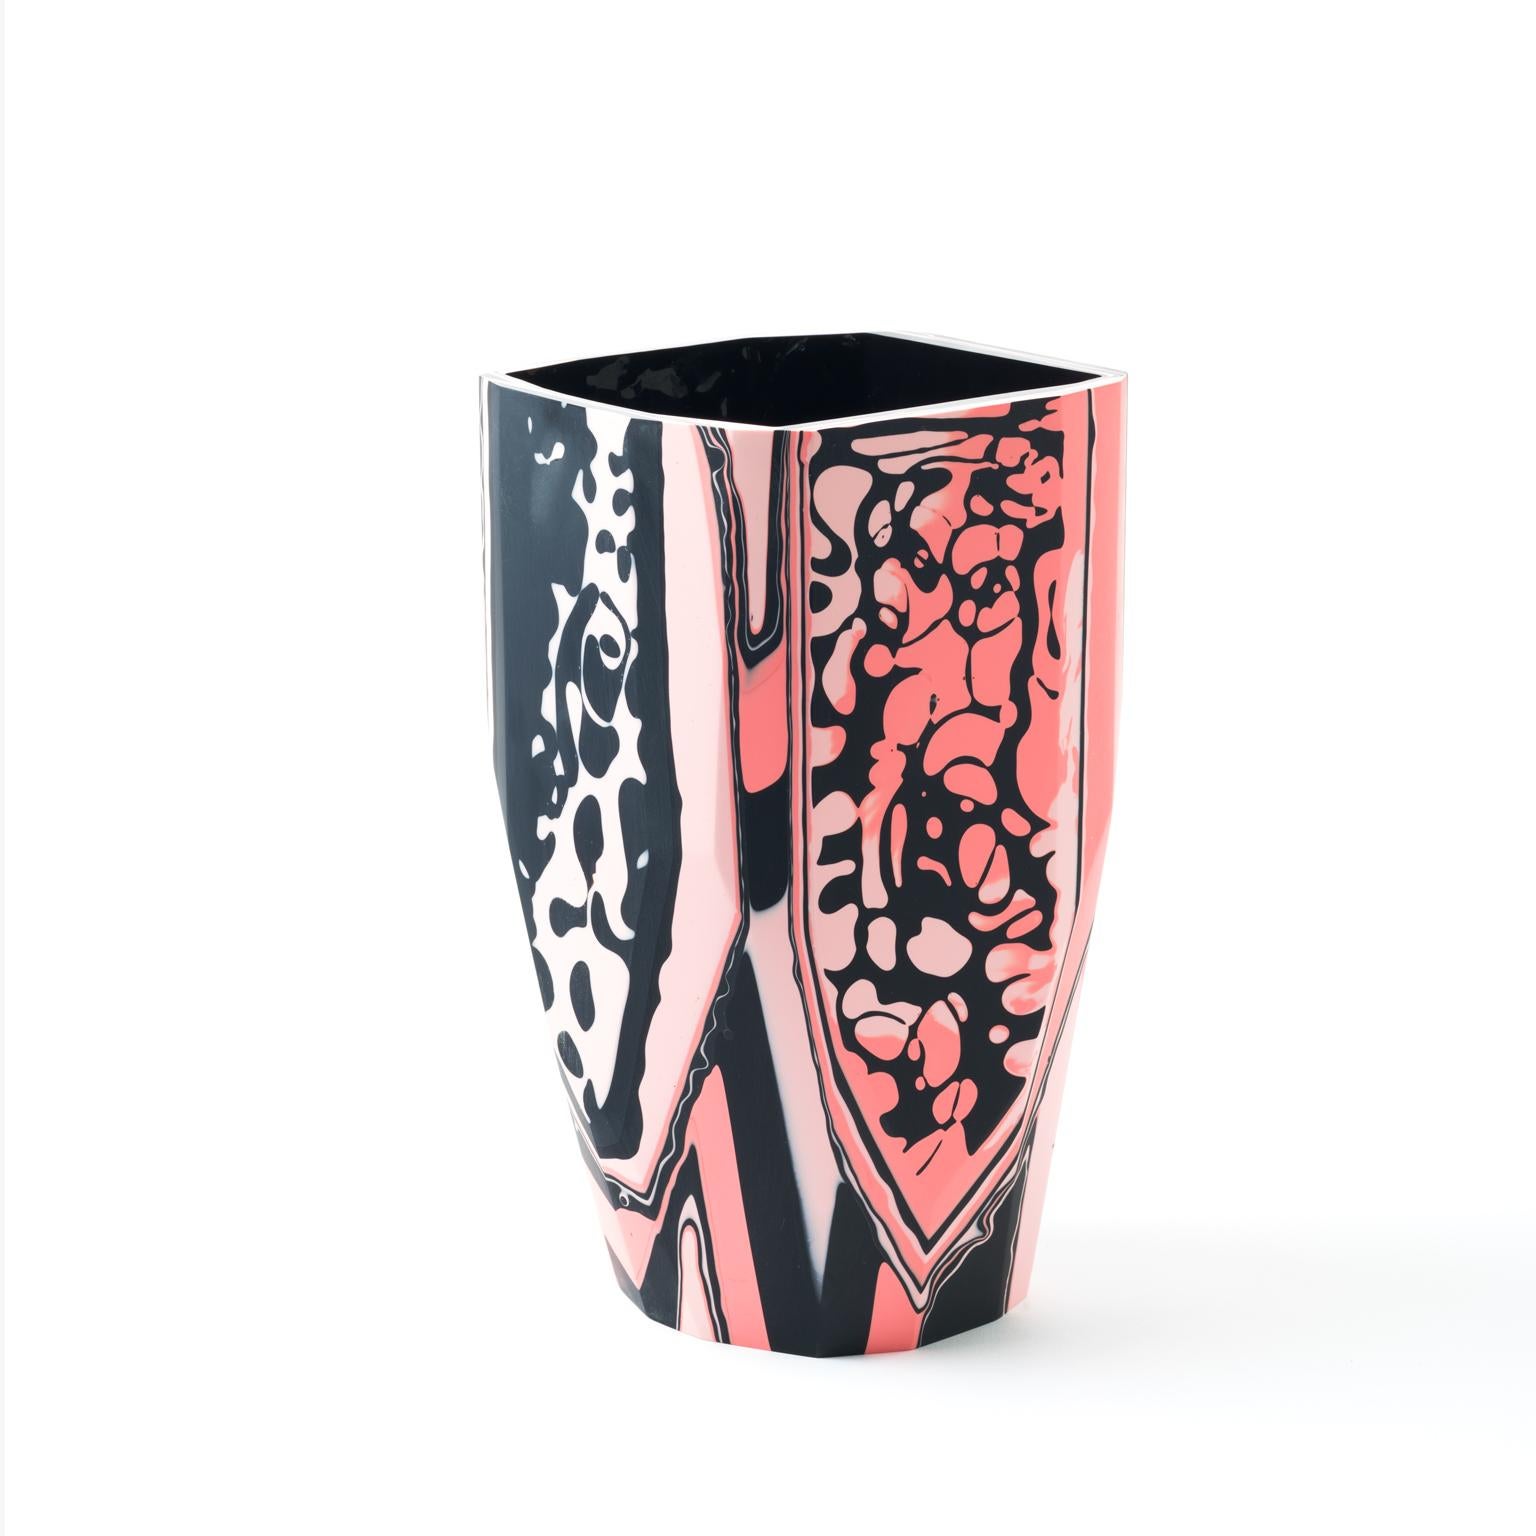 The fanciful and striking Nakuru Vase is a new addition to our Black Magic collection of resin vessels, inspired by the concept of revealing that which has been hidden from sight, but remains ever-present.

Gazing toward the past, to cultures and